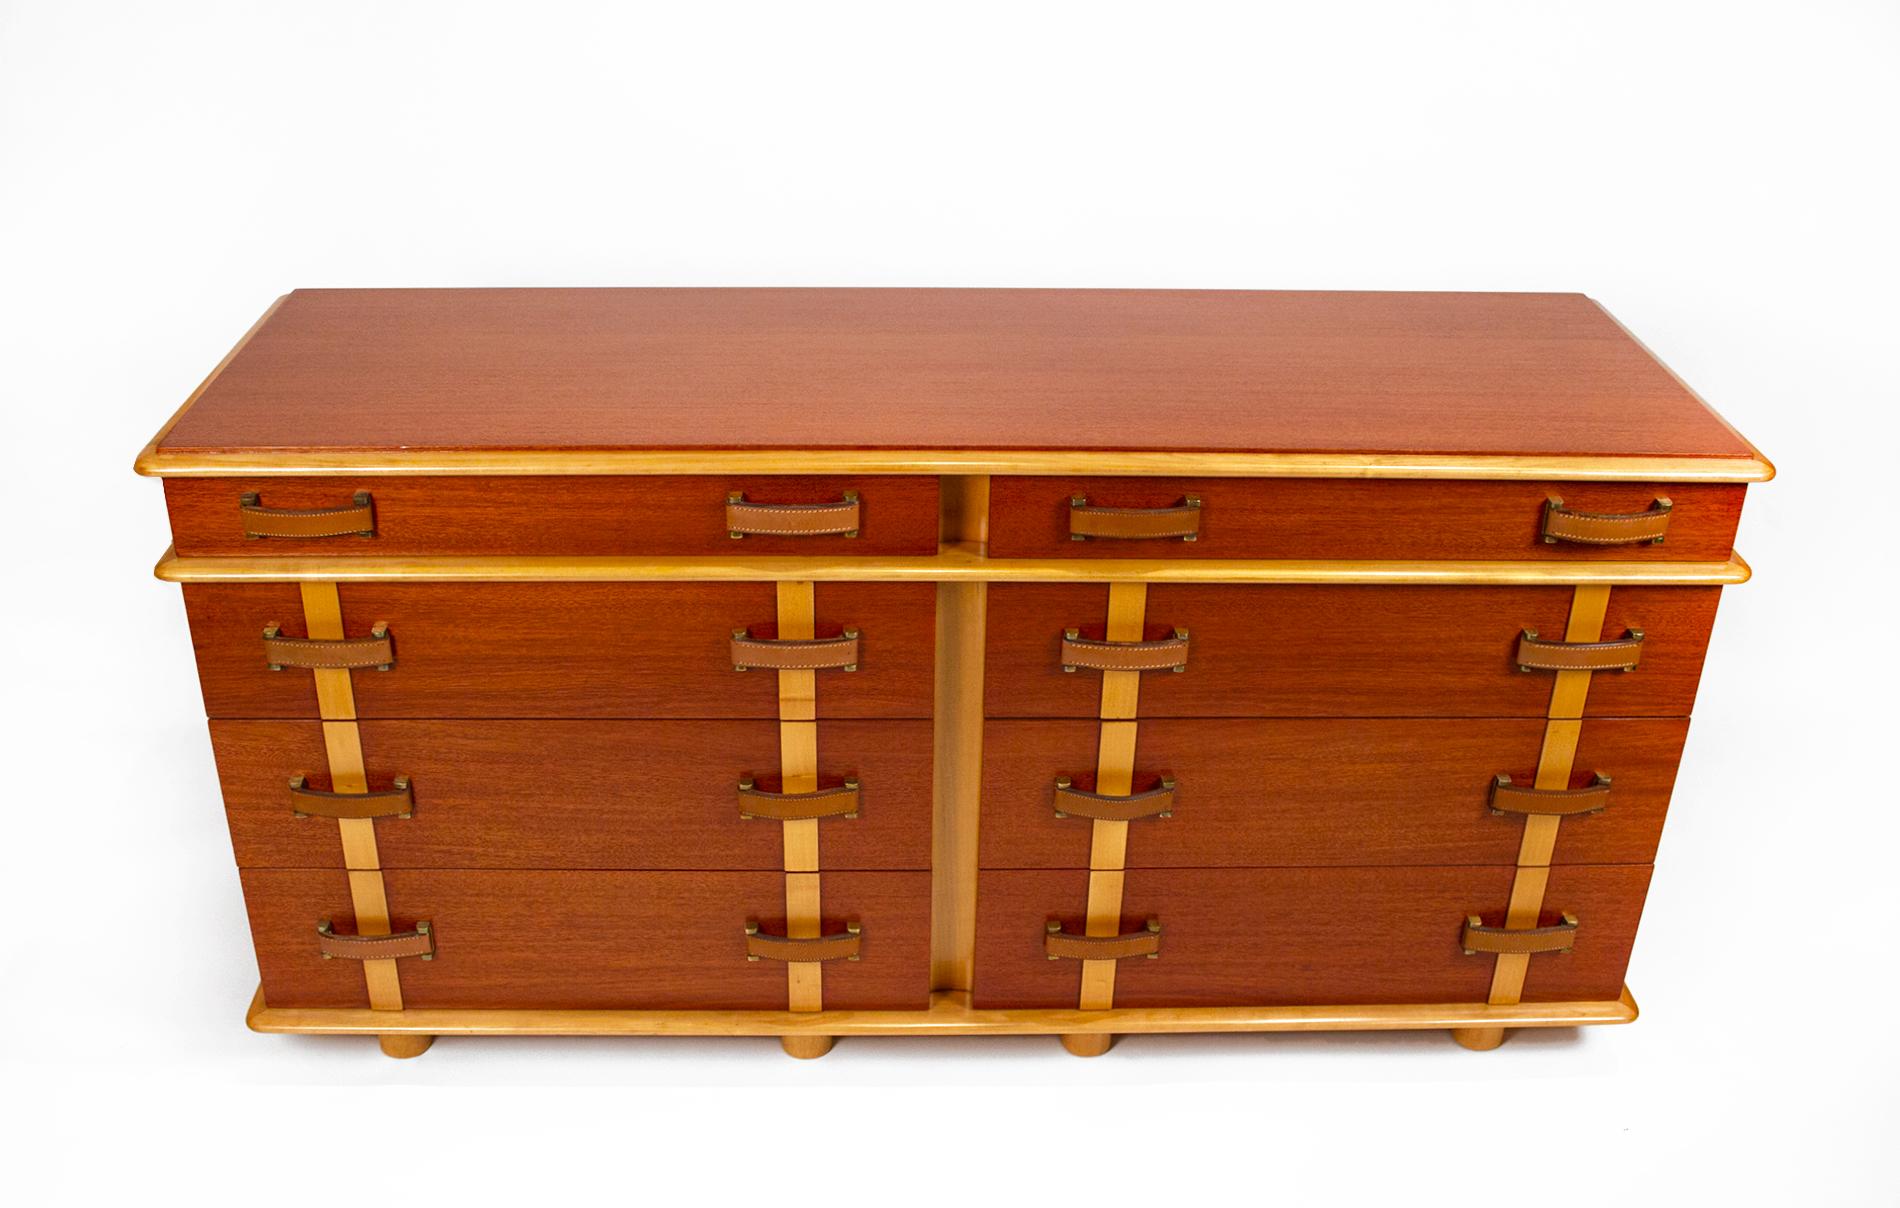 Cabinet constructed of Philippine mahogany and rock maple featuring 8 drawers with original handstitched leather handles attached with solid brass hardware. The interiors of the drawers are oak. This cabinet includes the coordinating solid maple